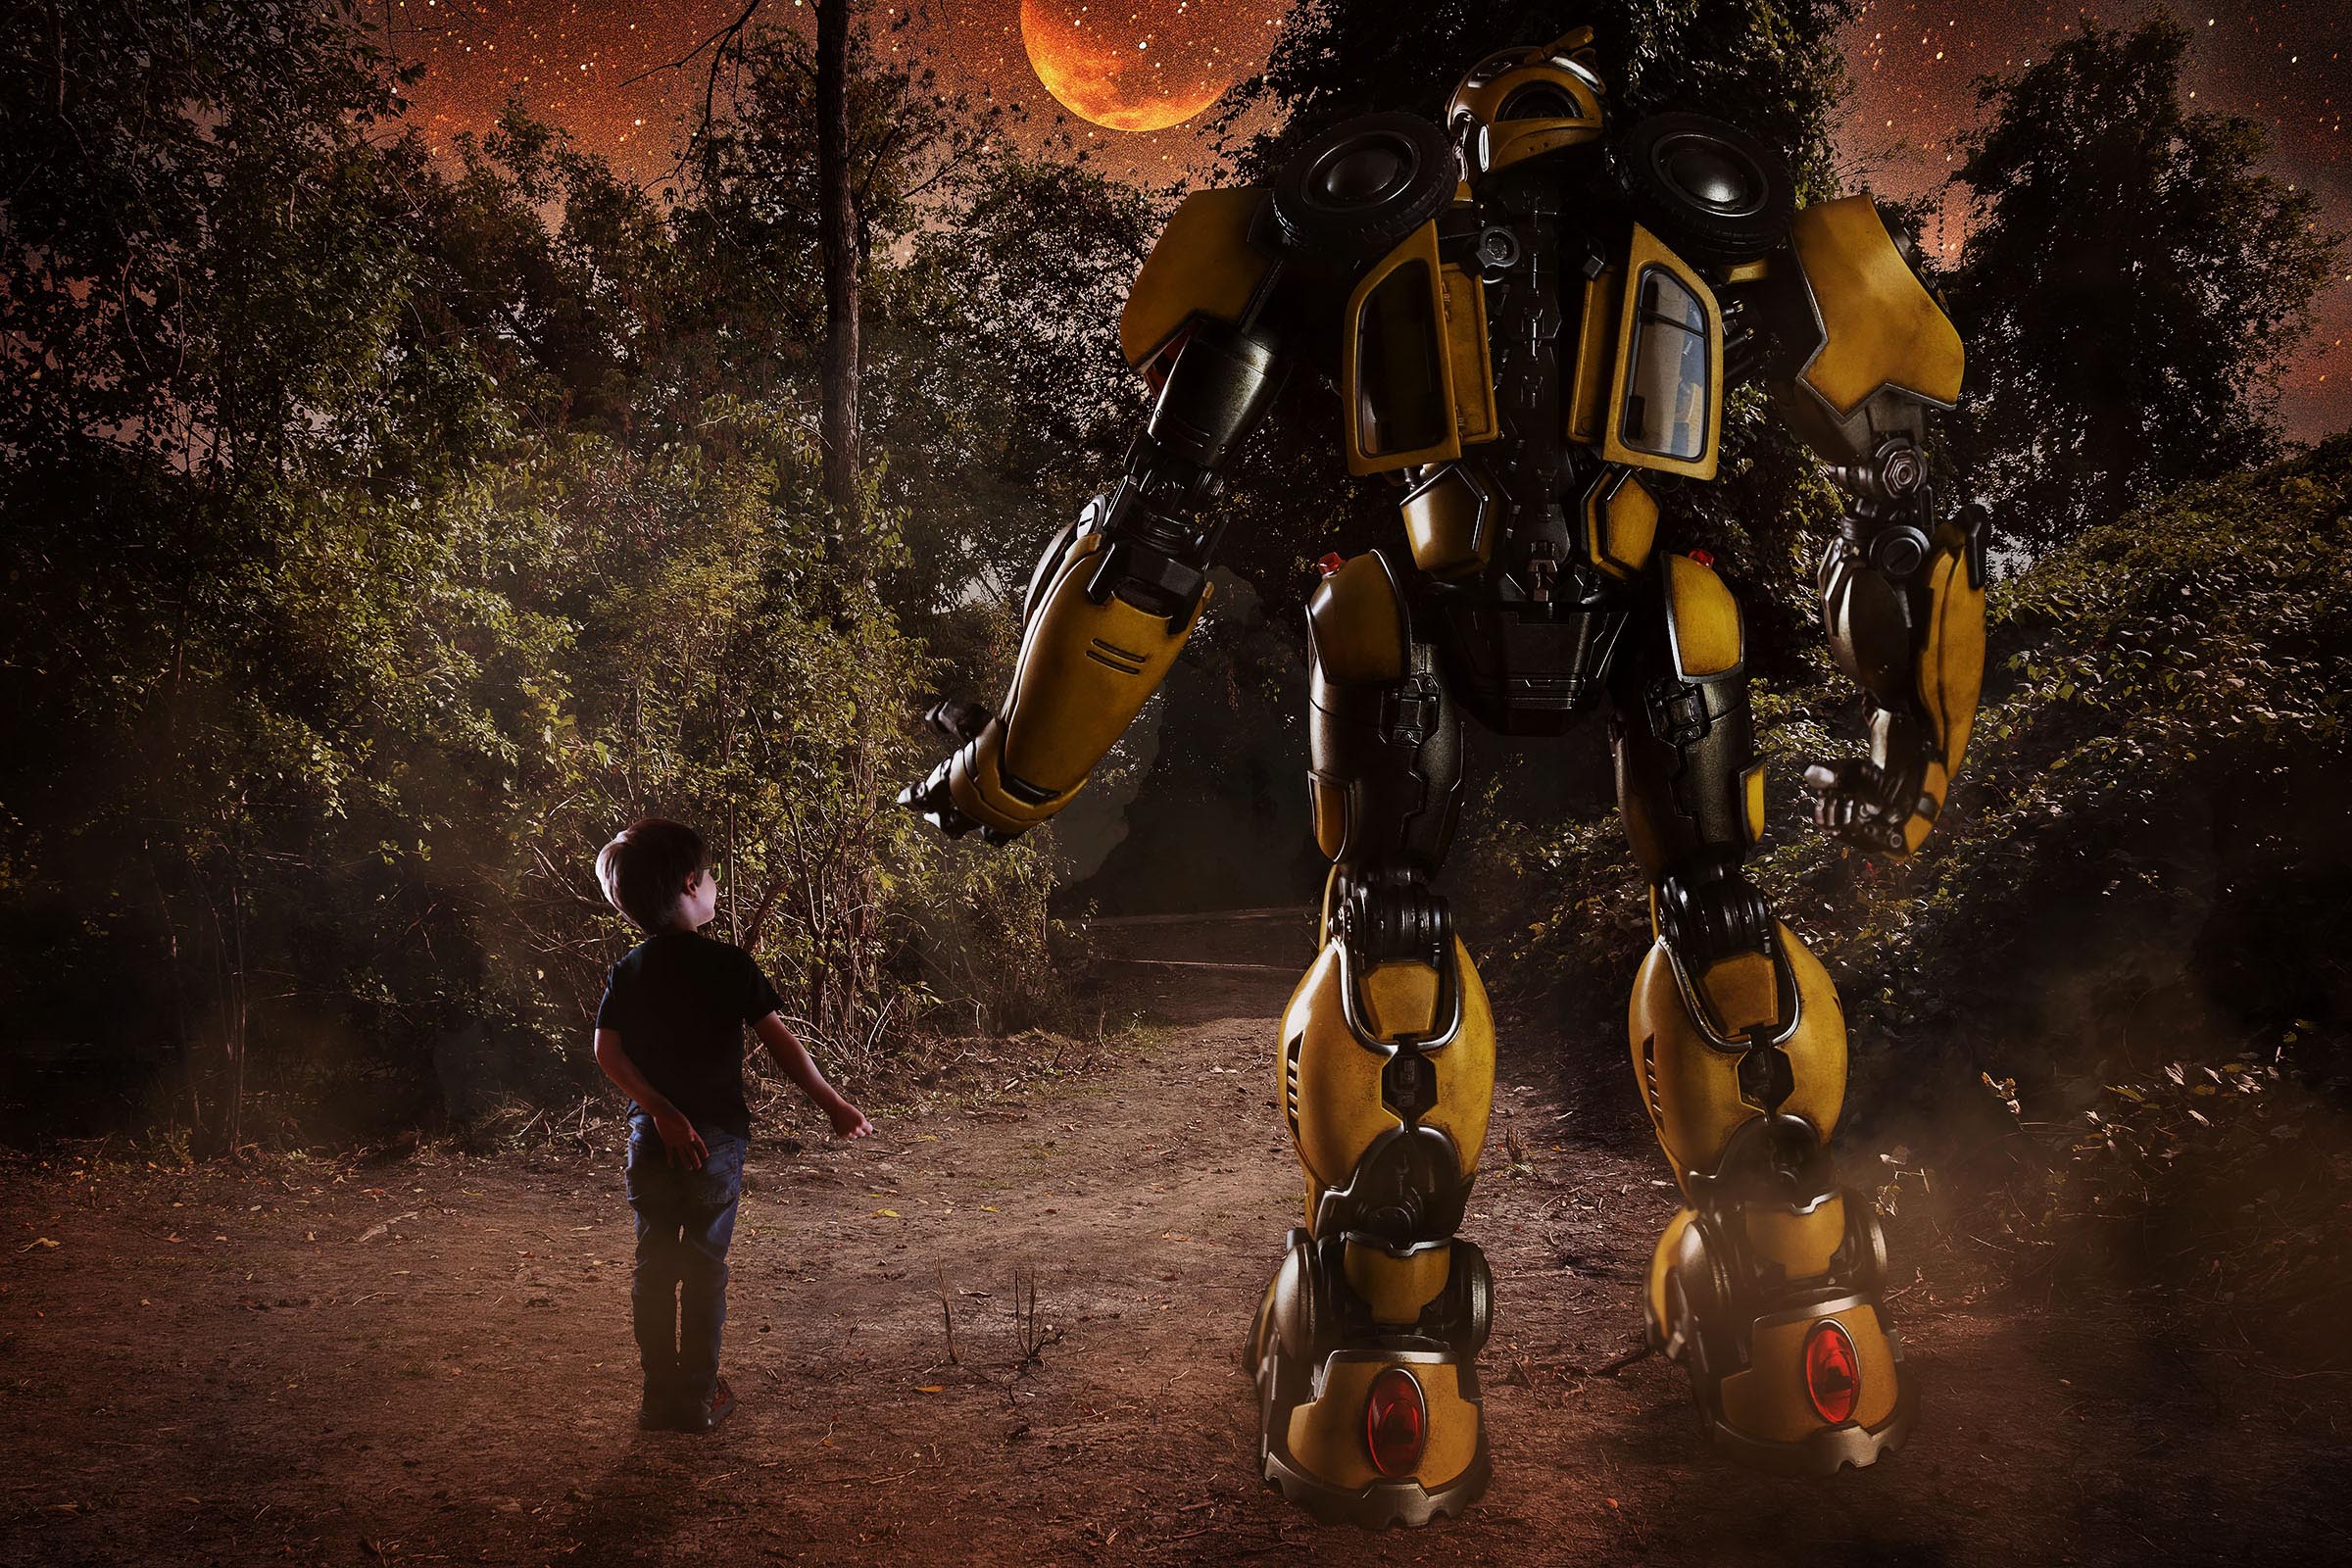 Composite of boy and Transformers Bumblebee holding hand walking in forest night scene with moon by Vaudreuil-Soulanges and West Island of Montreal photographer Tobi Malette